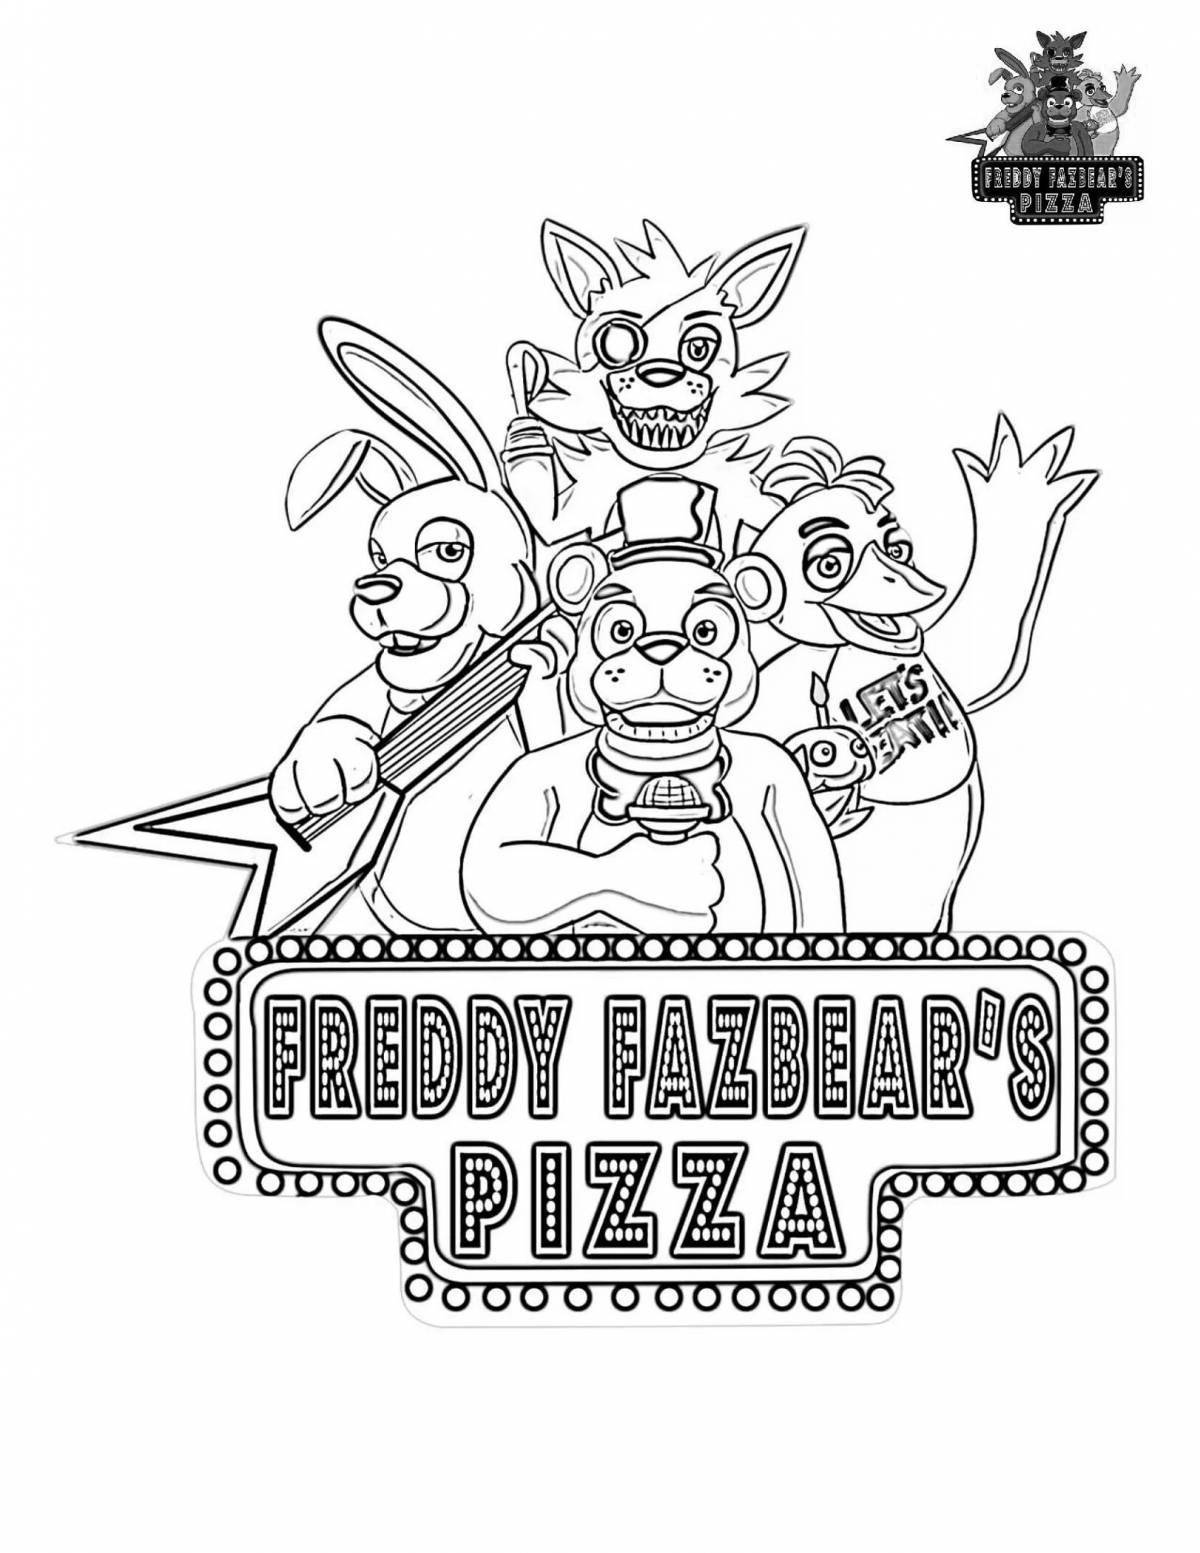 Luminous five nights at freddy's coloring page